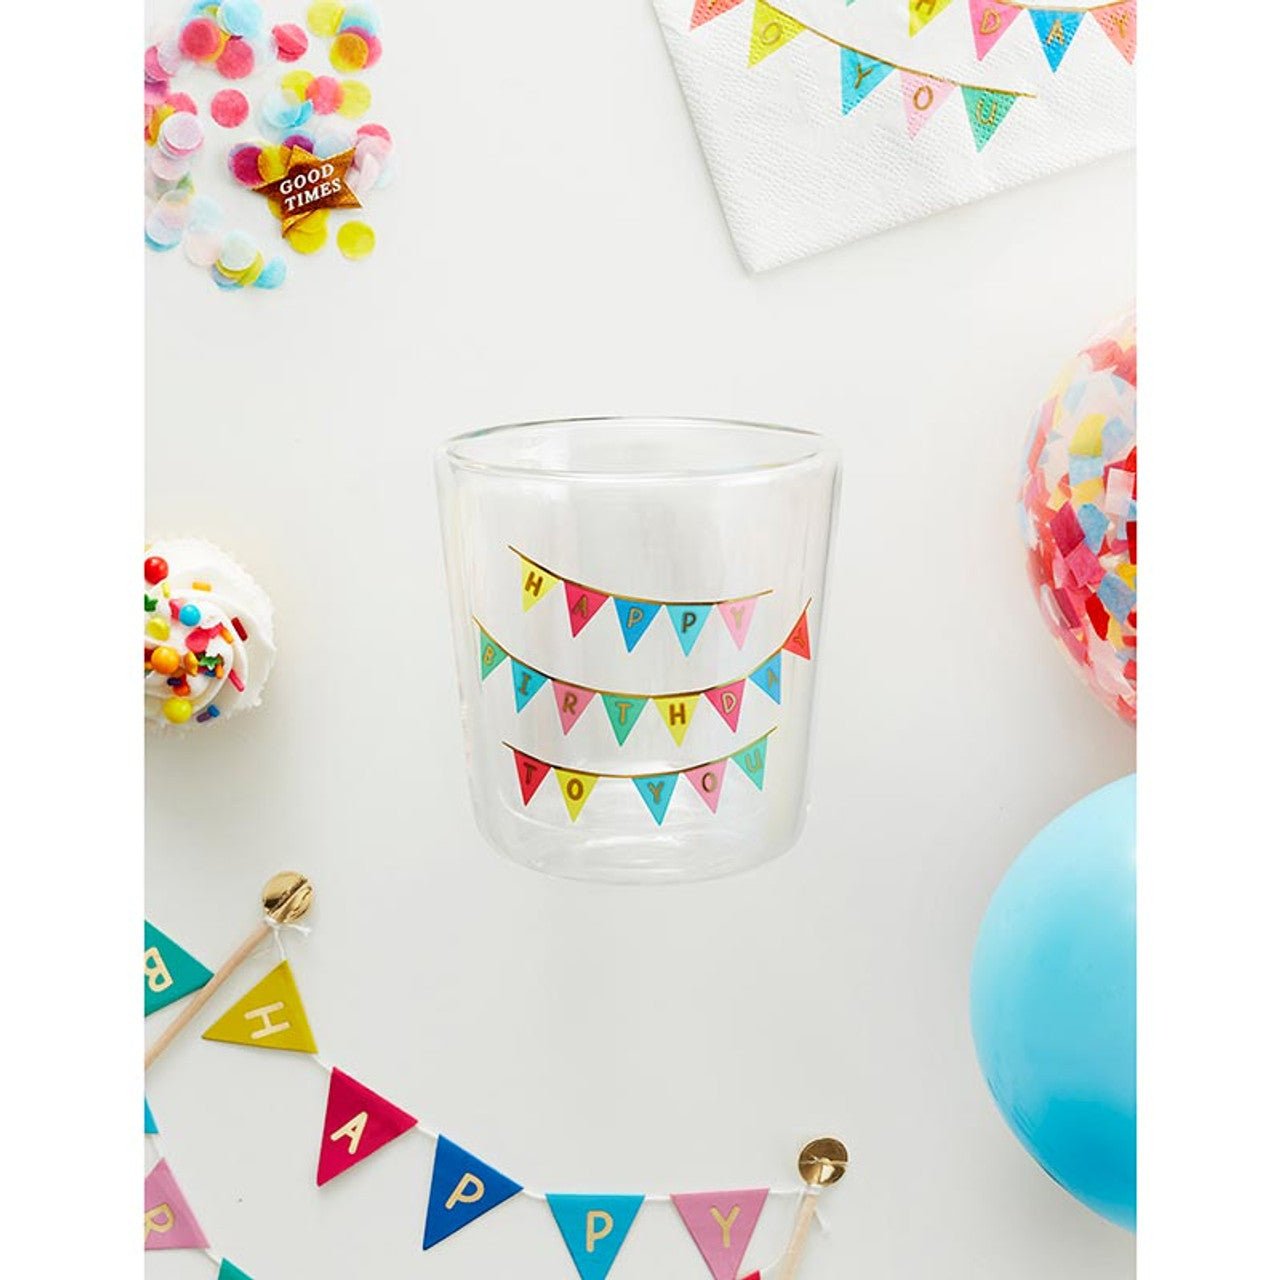 Good Times Multicolor Table Confetti | Party Supplies